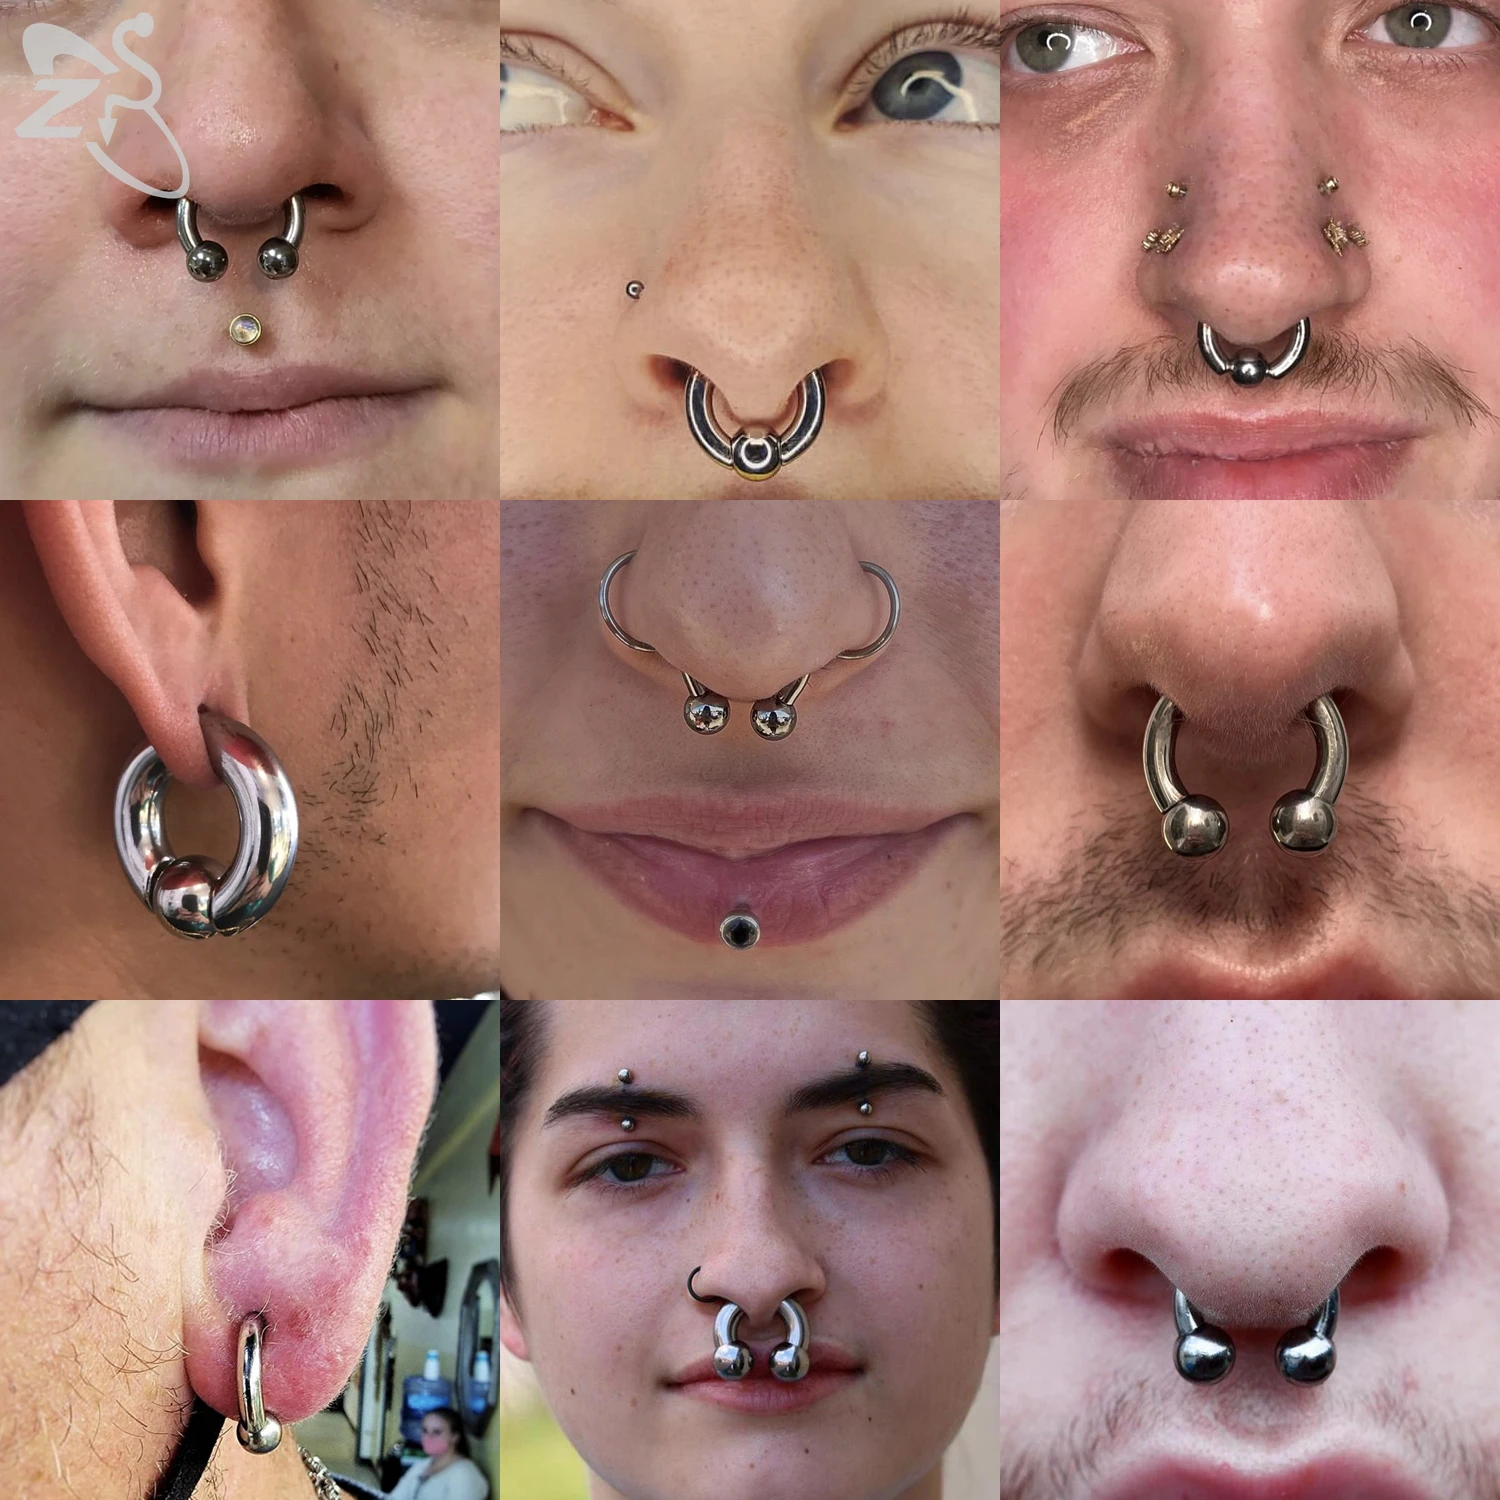 ZS 1 PC 2/4/6/8G Stainelss Steel Horseshoe Nose Ring Internal Threaded Large Gauge Piercings Noses Ear Expander Septum Piercing images - 6